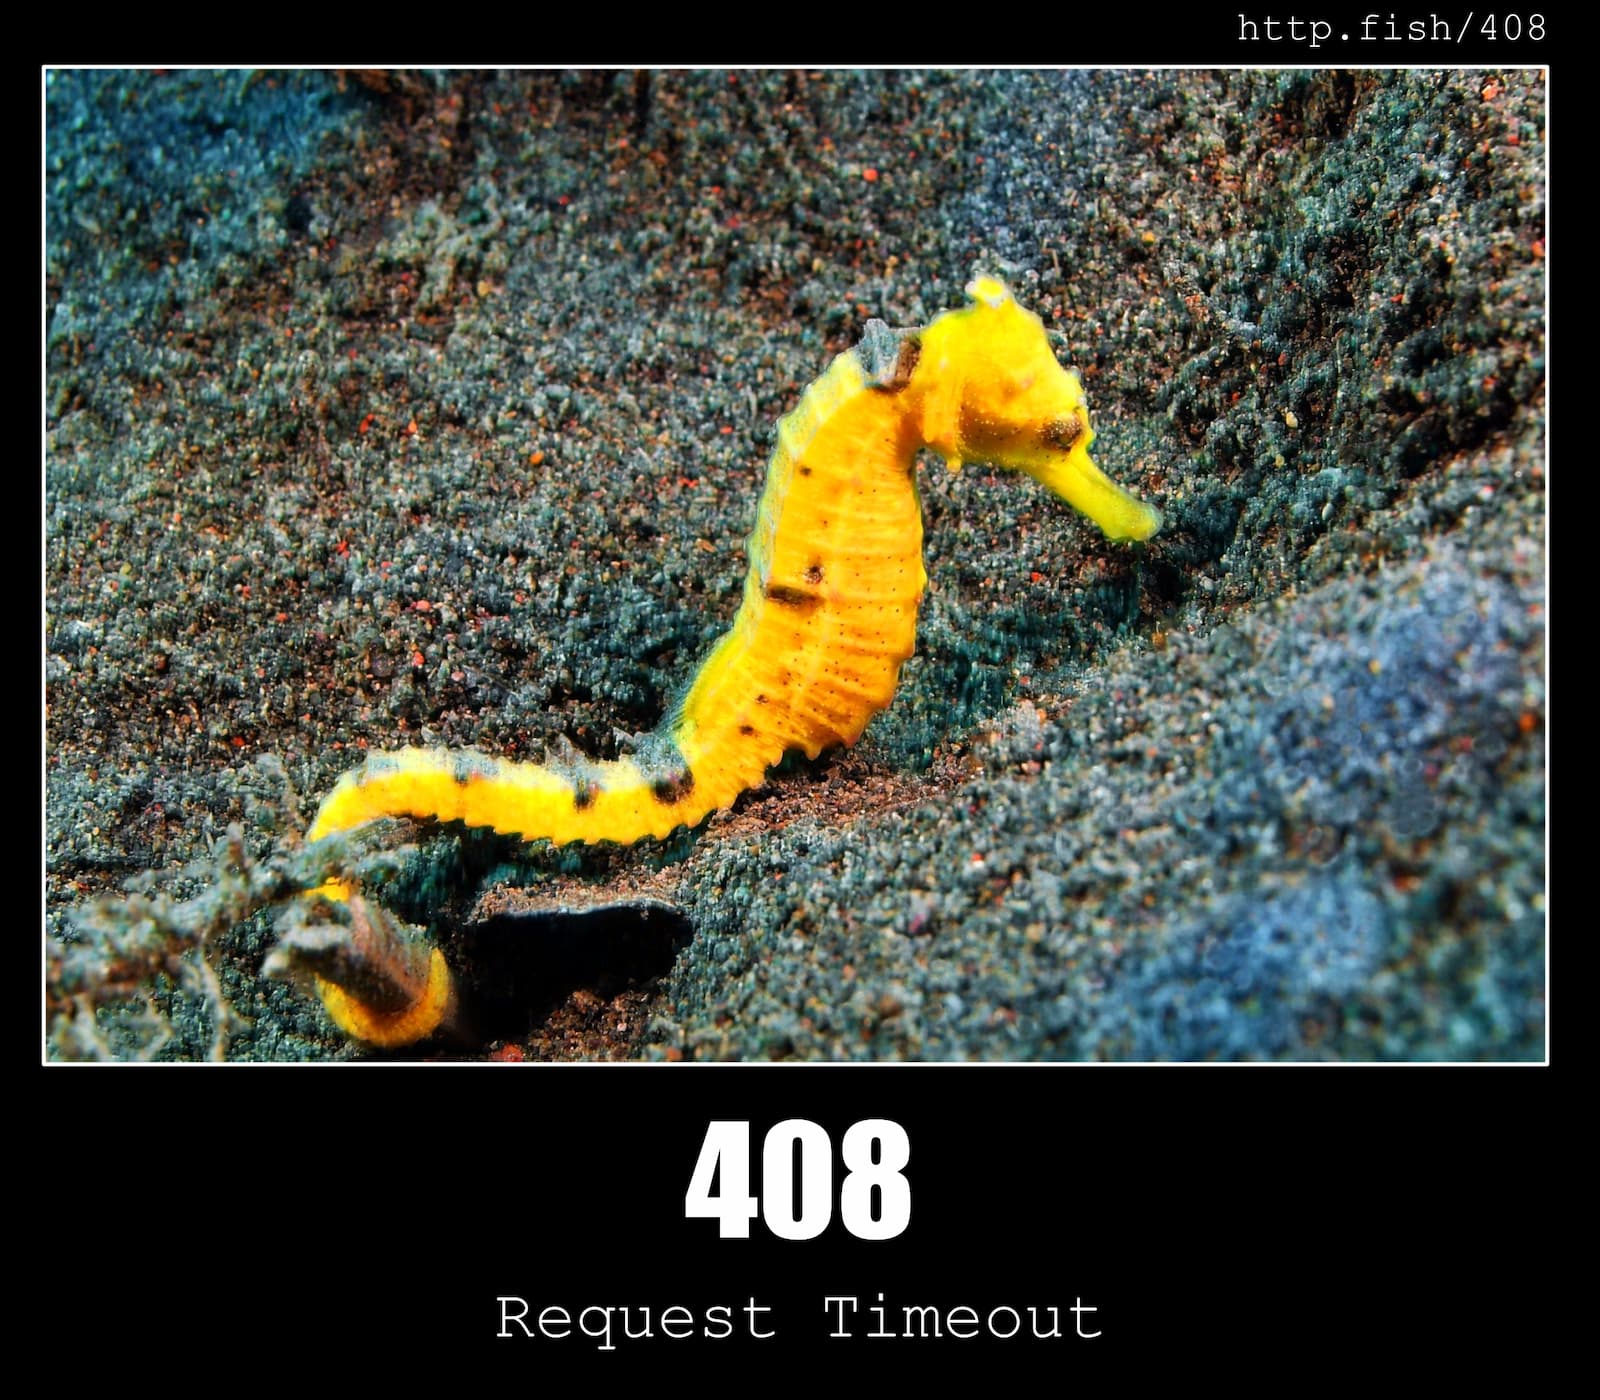 HTTP Status Code 408 Request Timeout & Fish